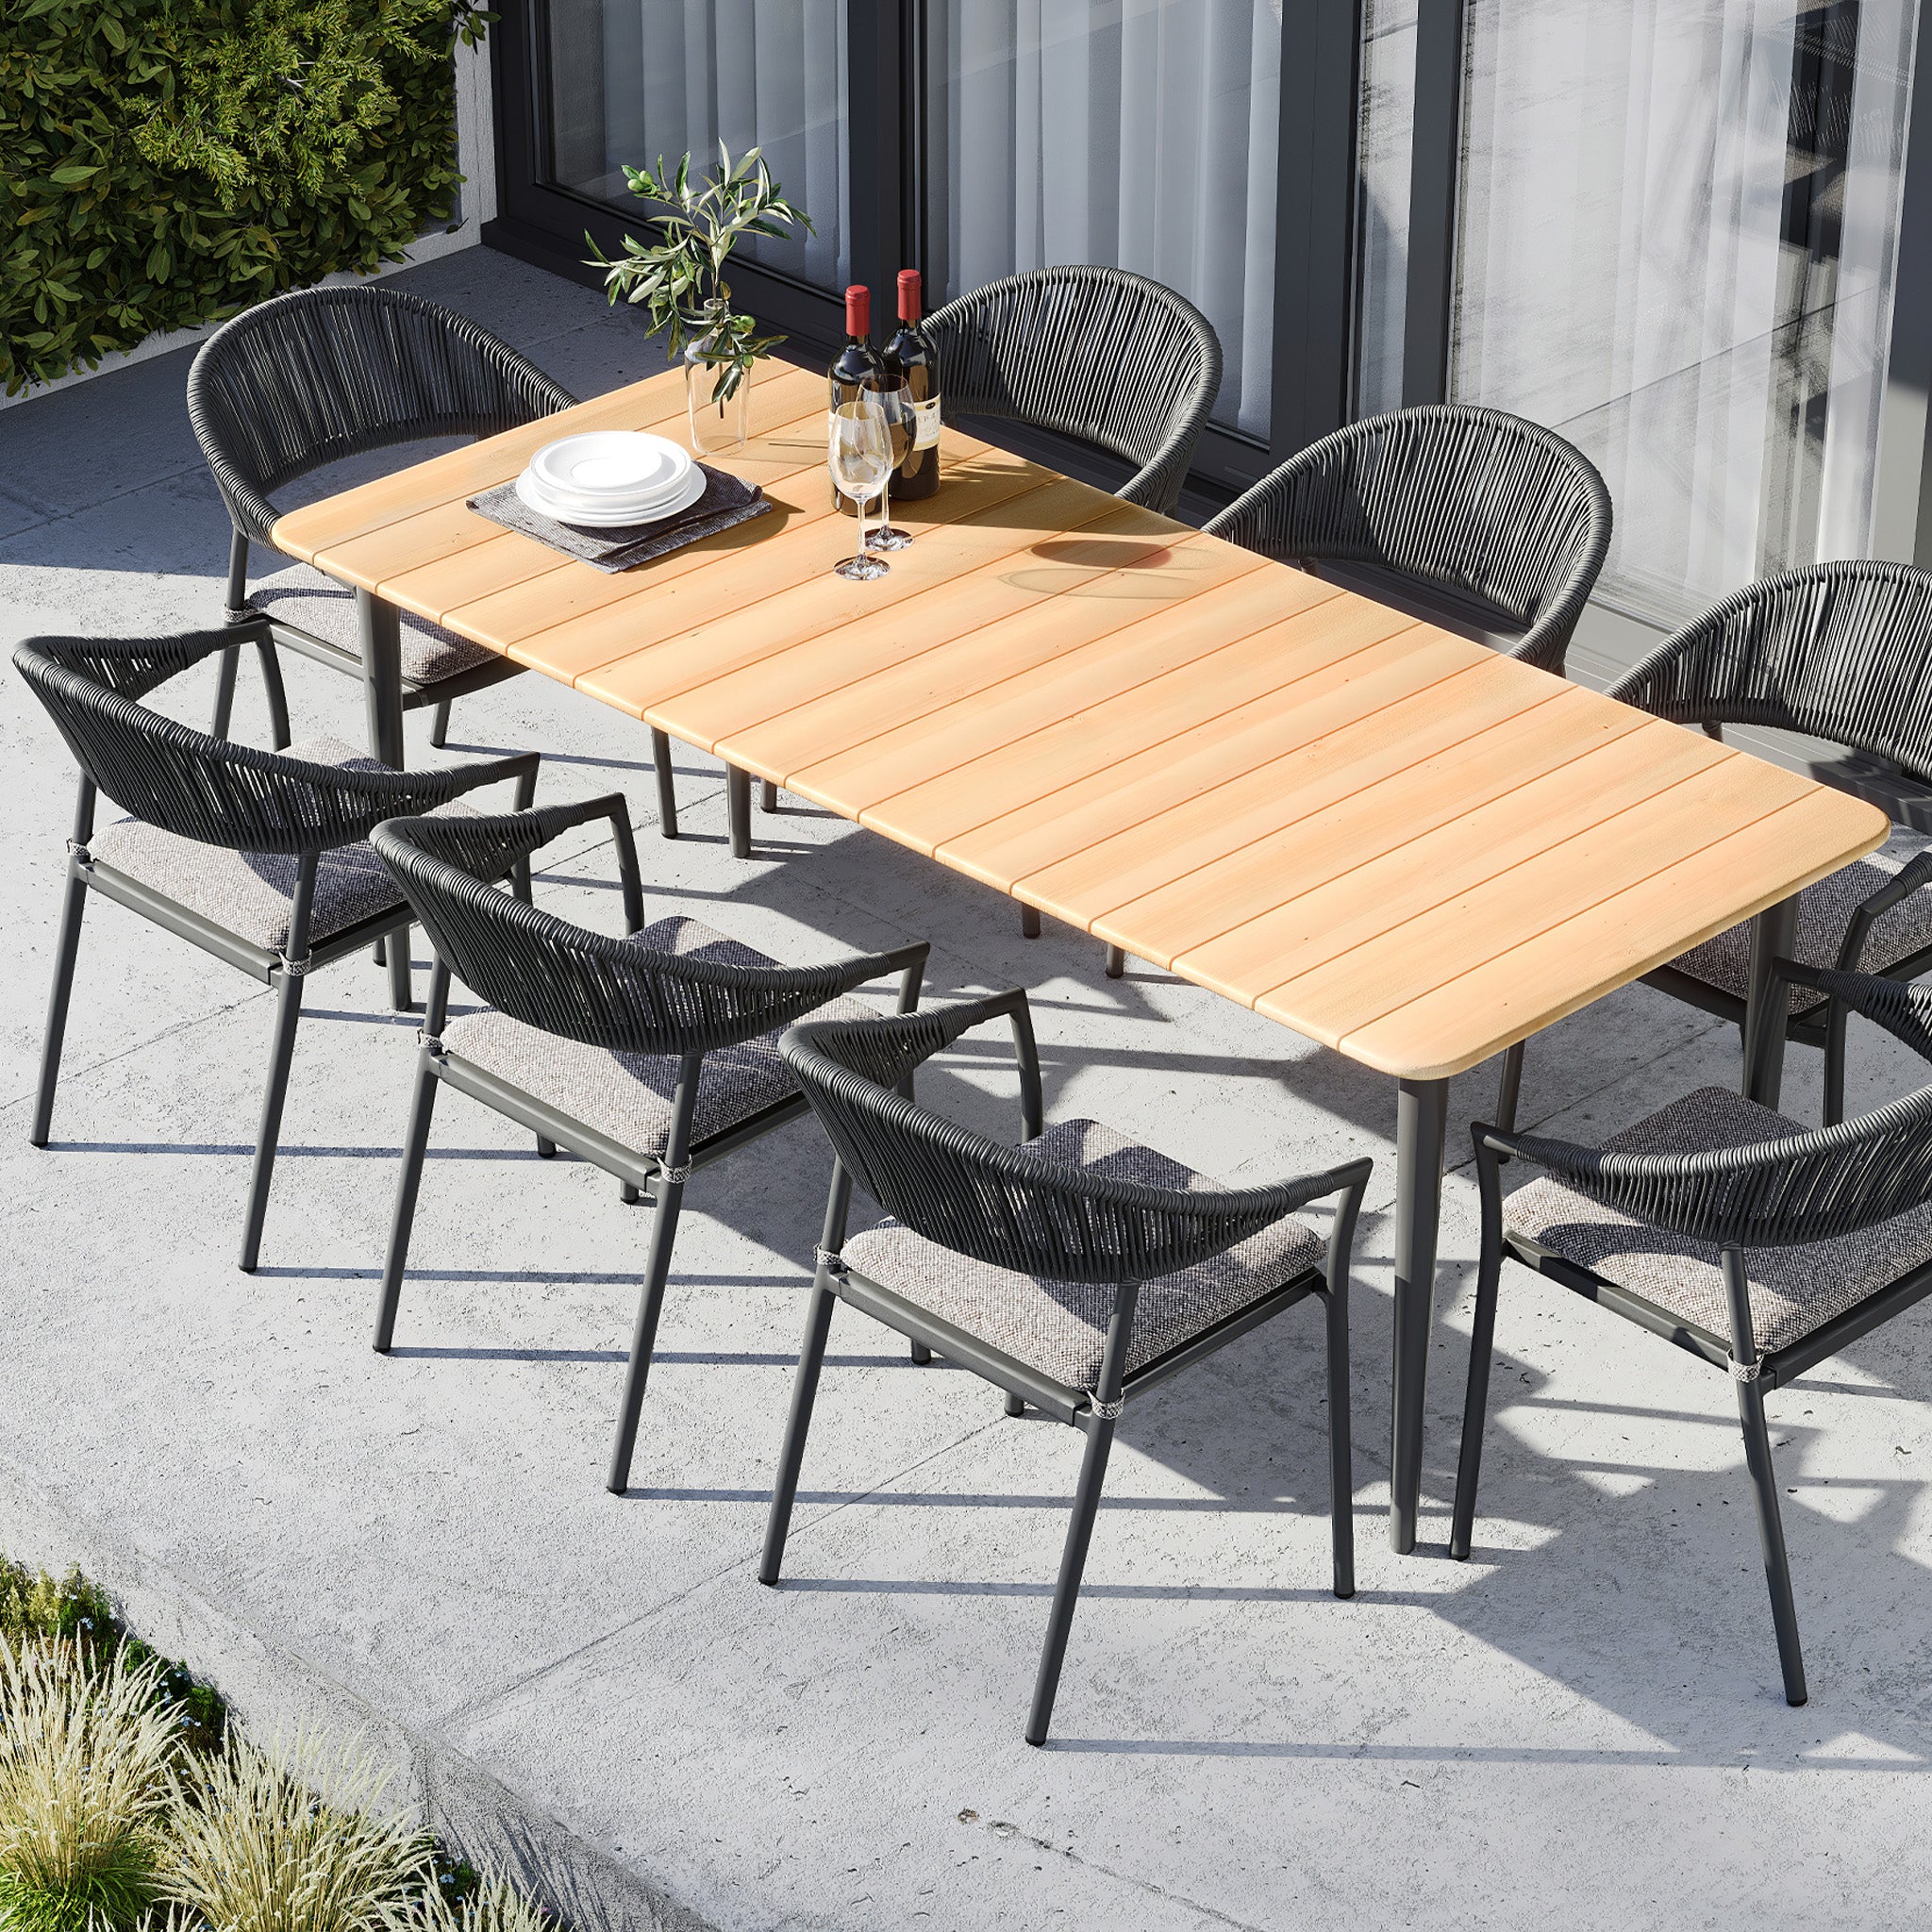 Cloverly 8 Seat Rectangular Dining with Teak Table in Charcoal